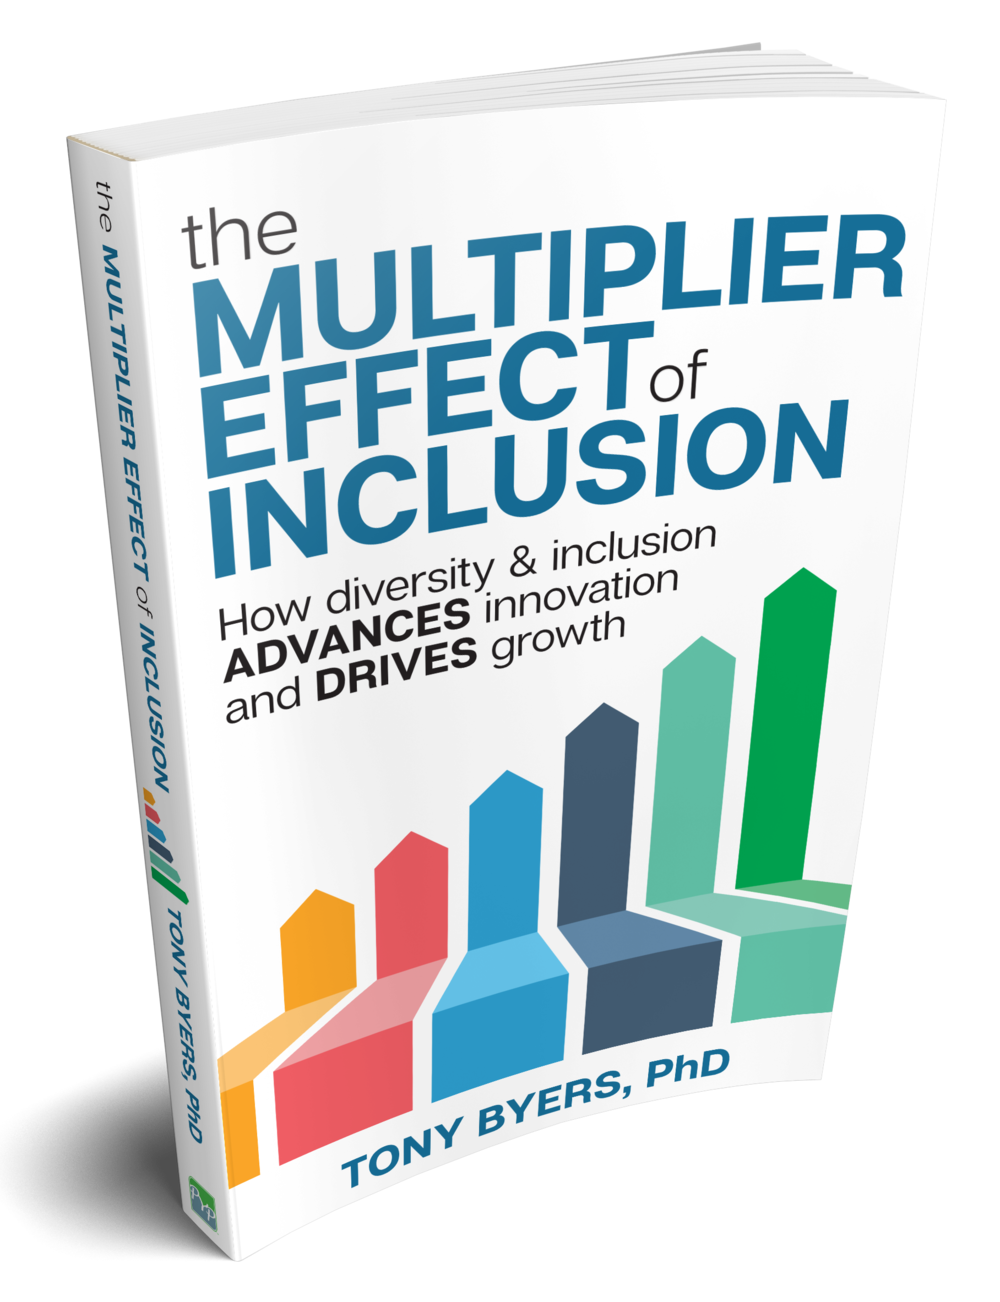 The Multiplier Effect of Inclusion book cover